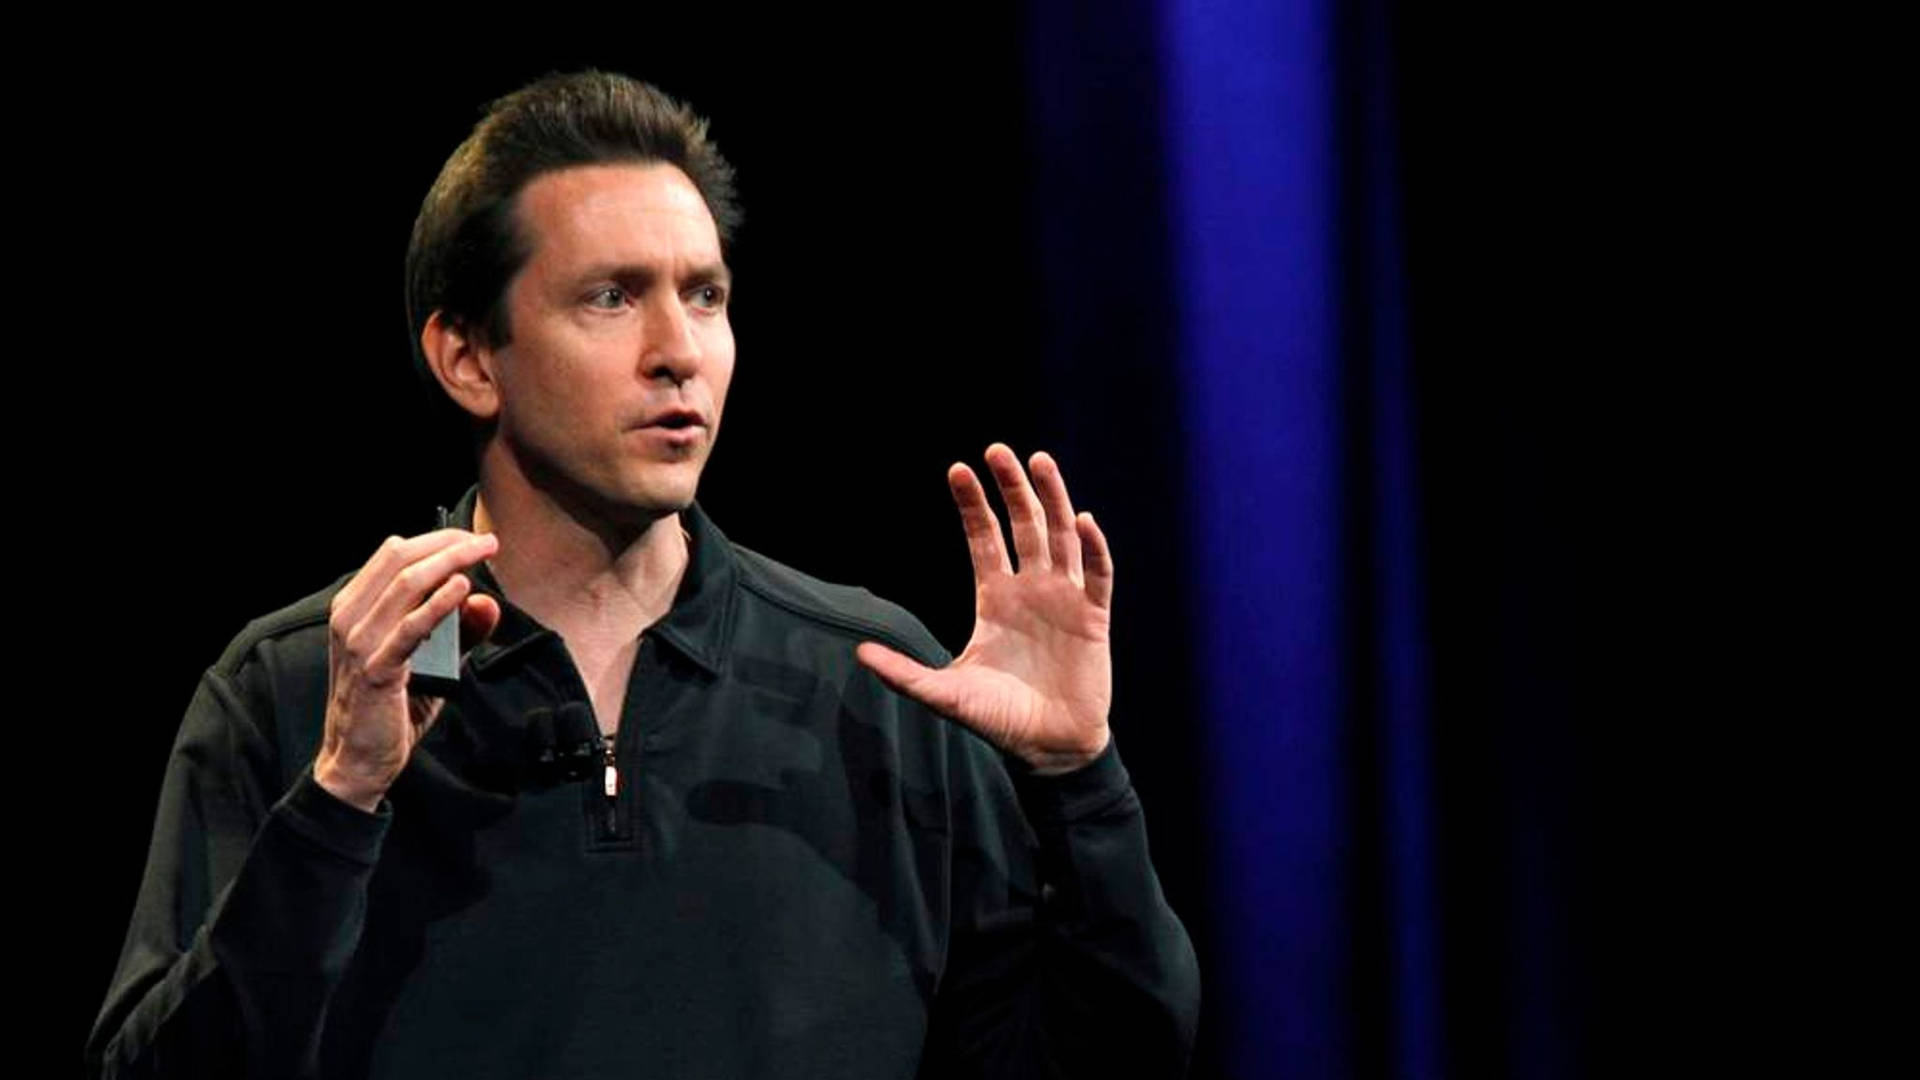 Scott Forstall Gesturing With His Hands Wallpaper